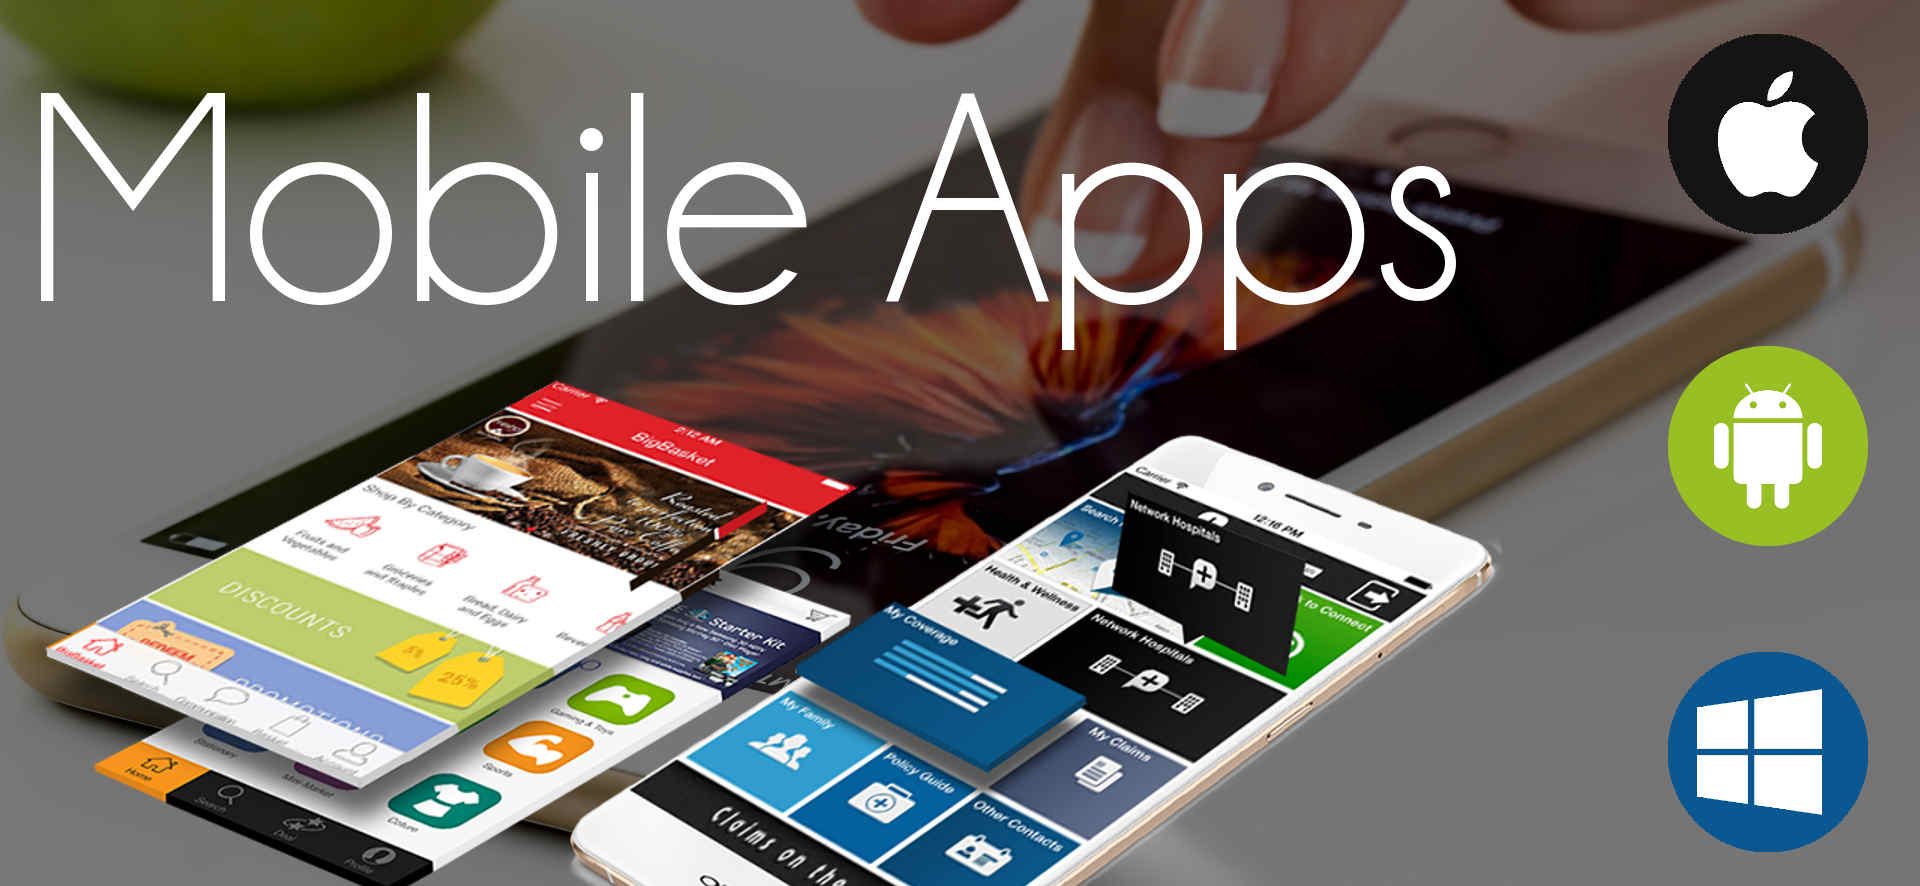 Why app development is necessary for your business? - Image 1